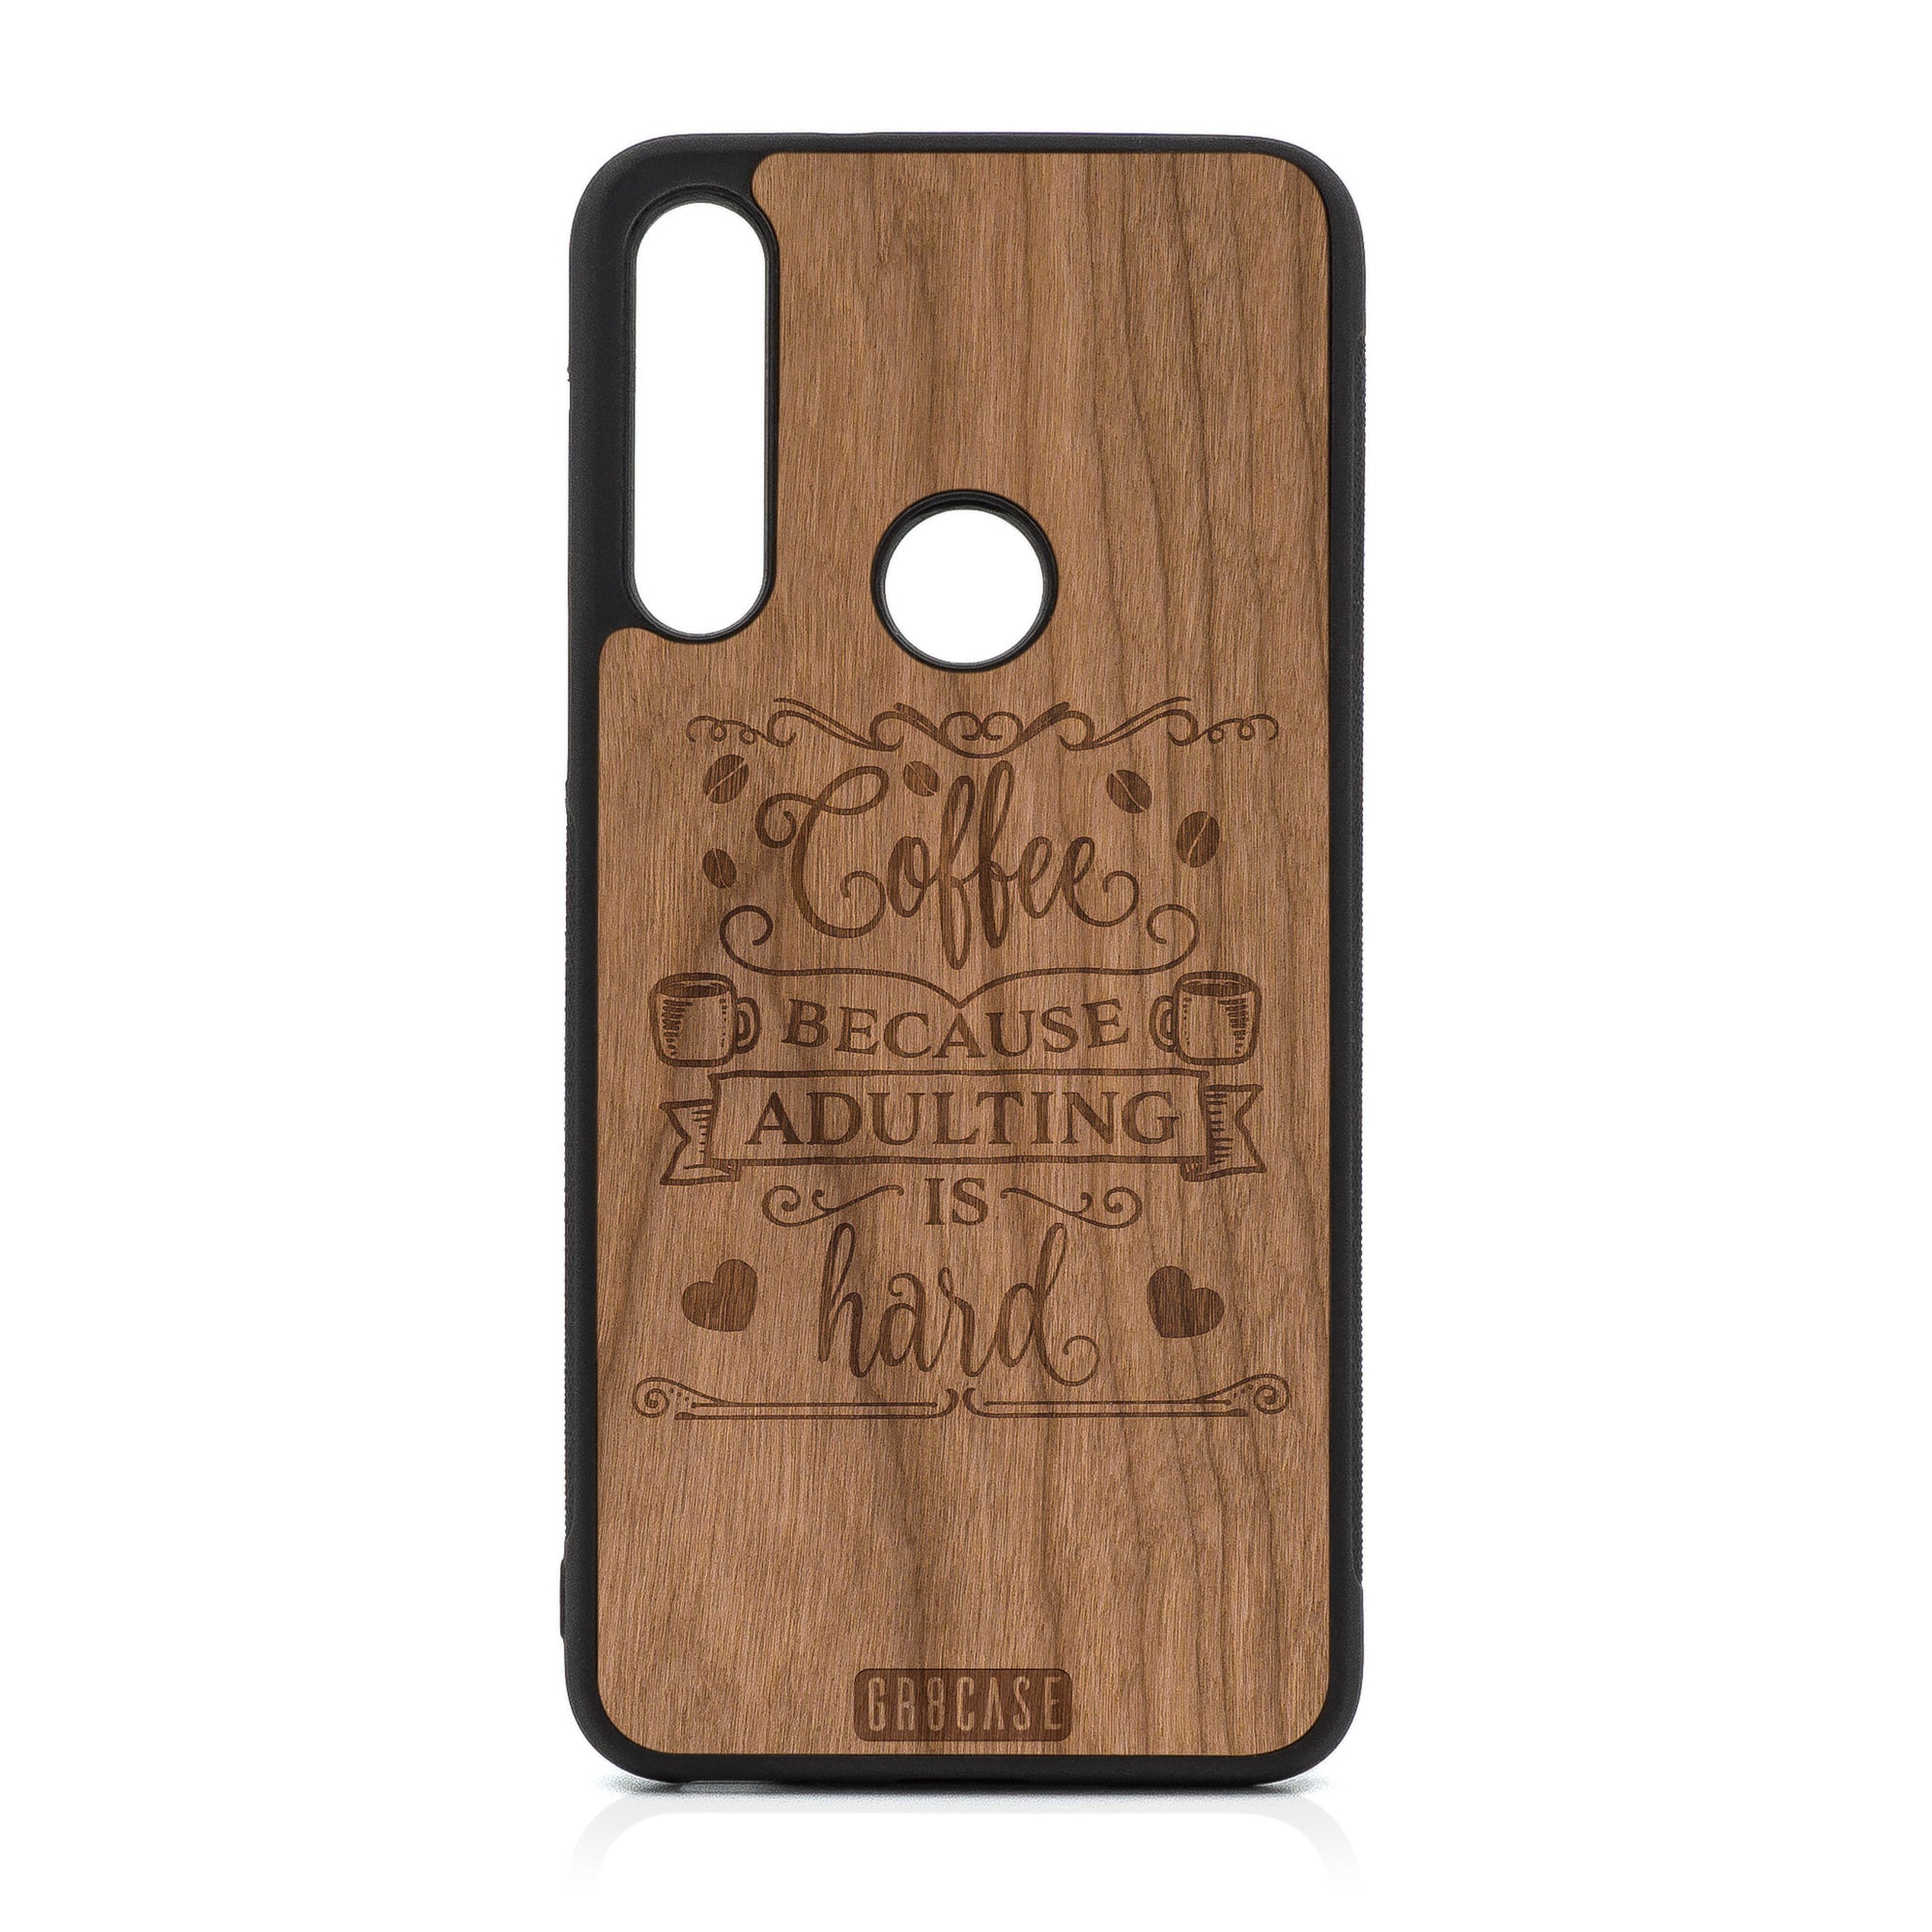 Coffee Because Adulting Is Hard Design Wood Case For Moto G Fast